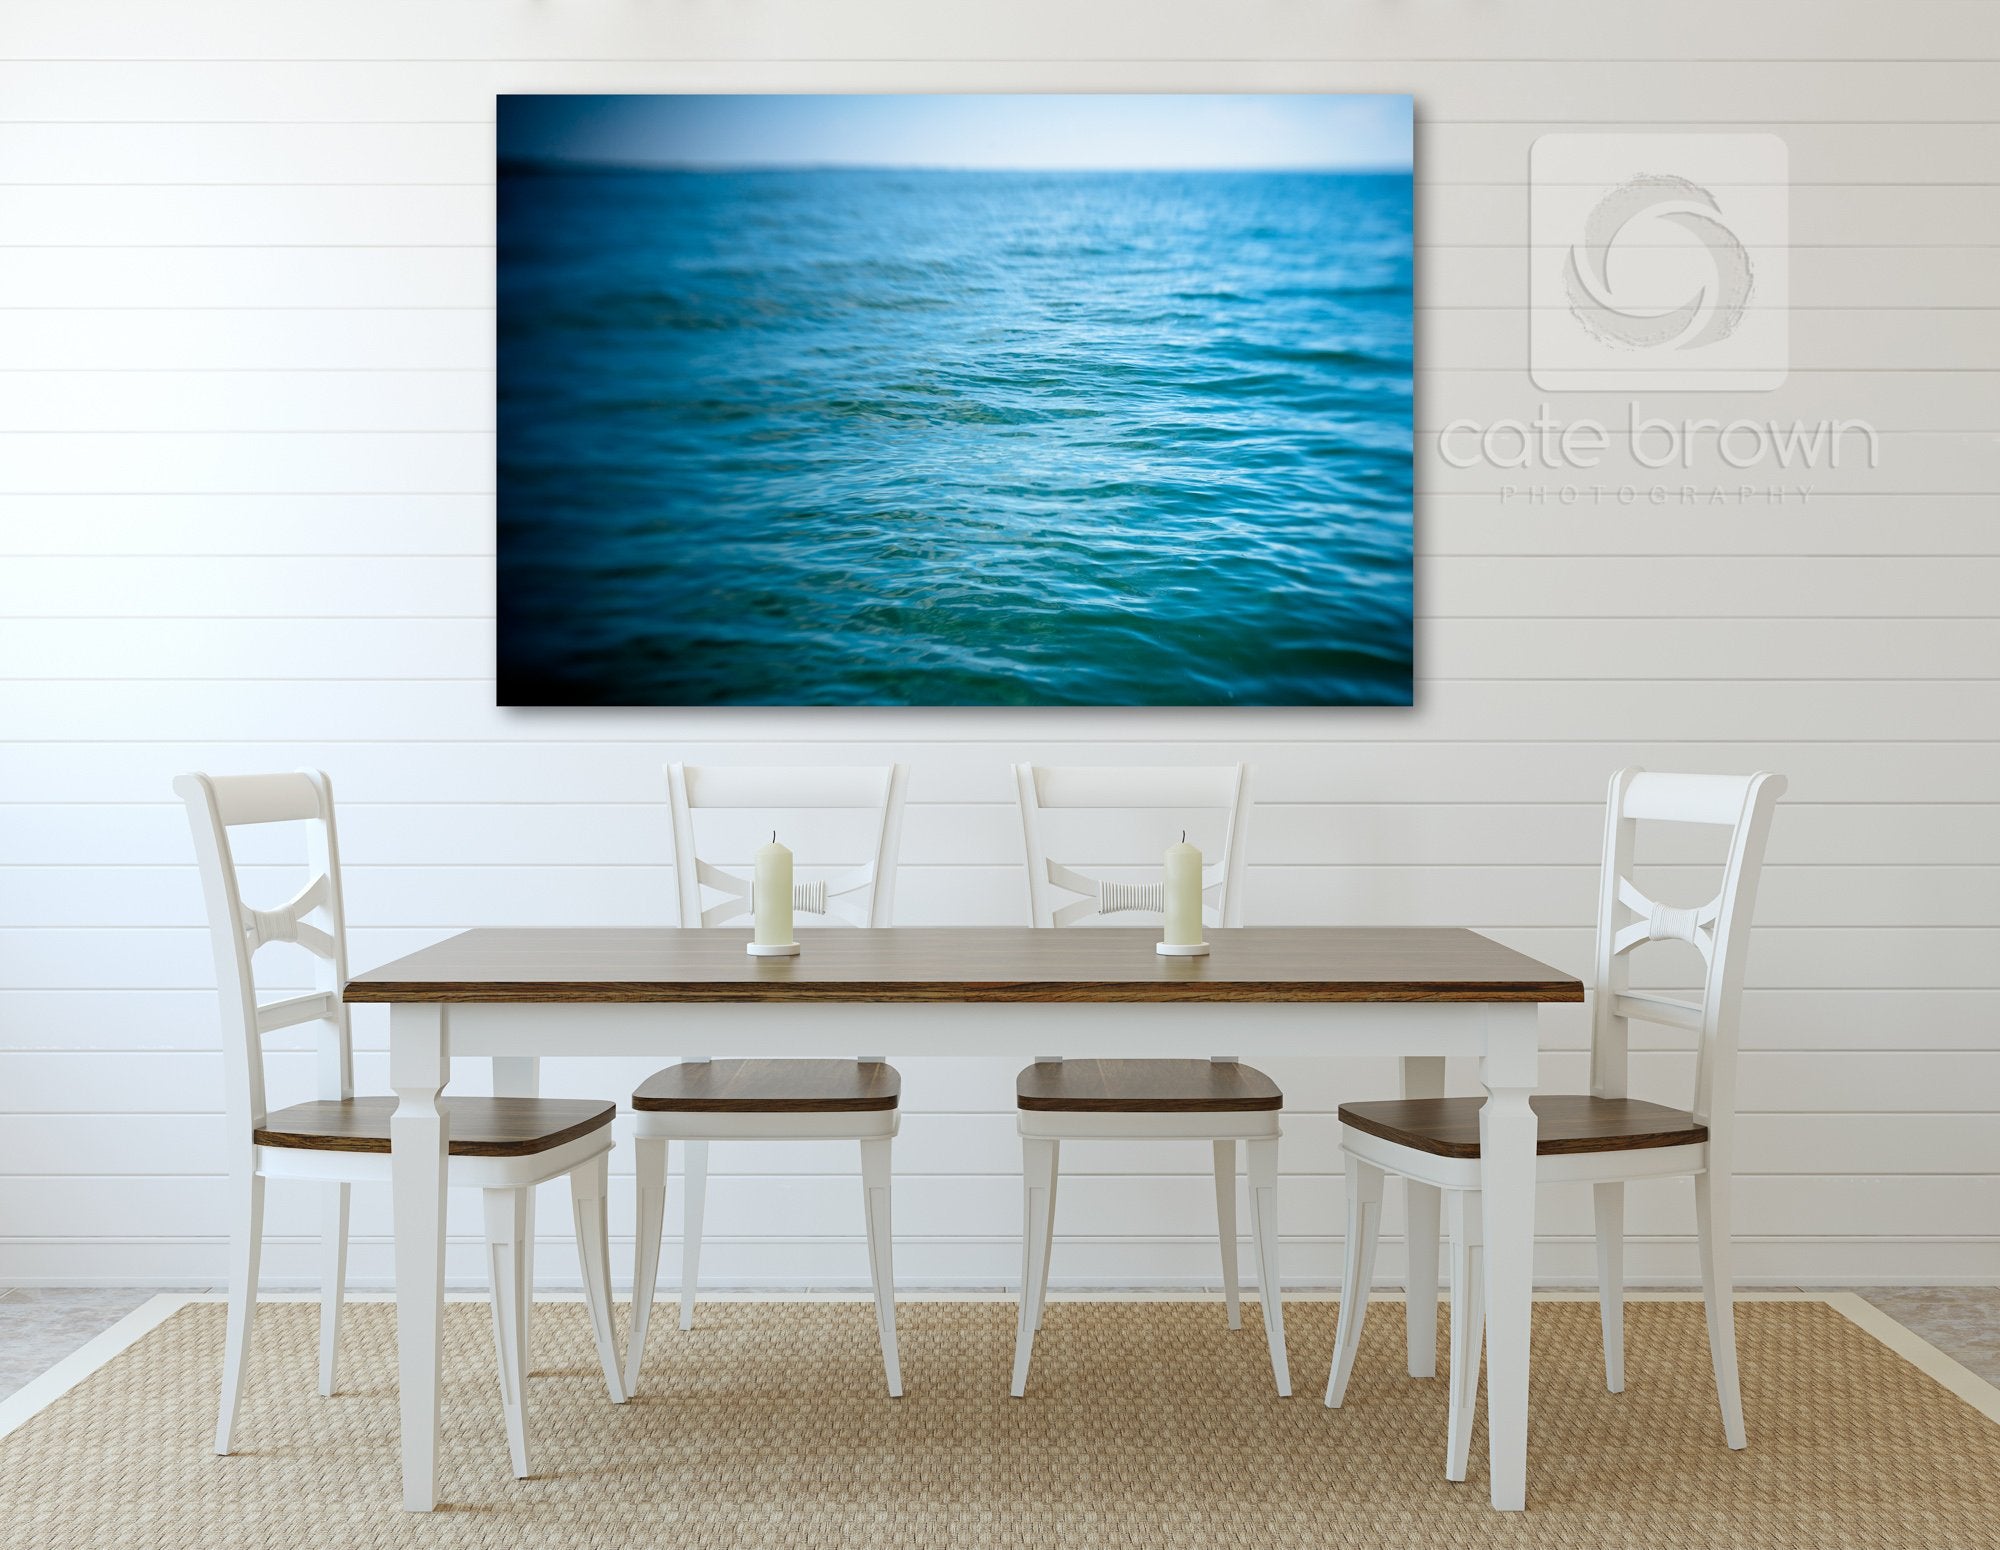 Cate Brown Photo Endless Blue  //  Ocean Photography Made to Order Ocean Fine Art